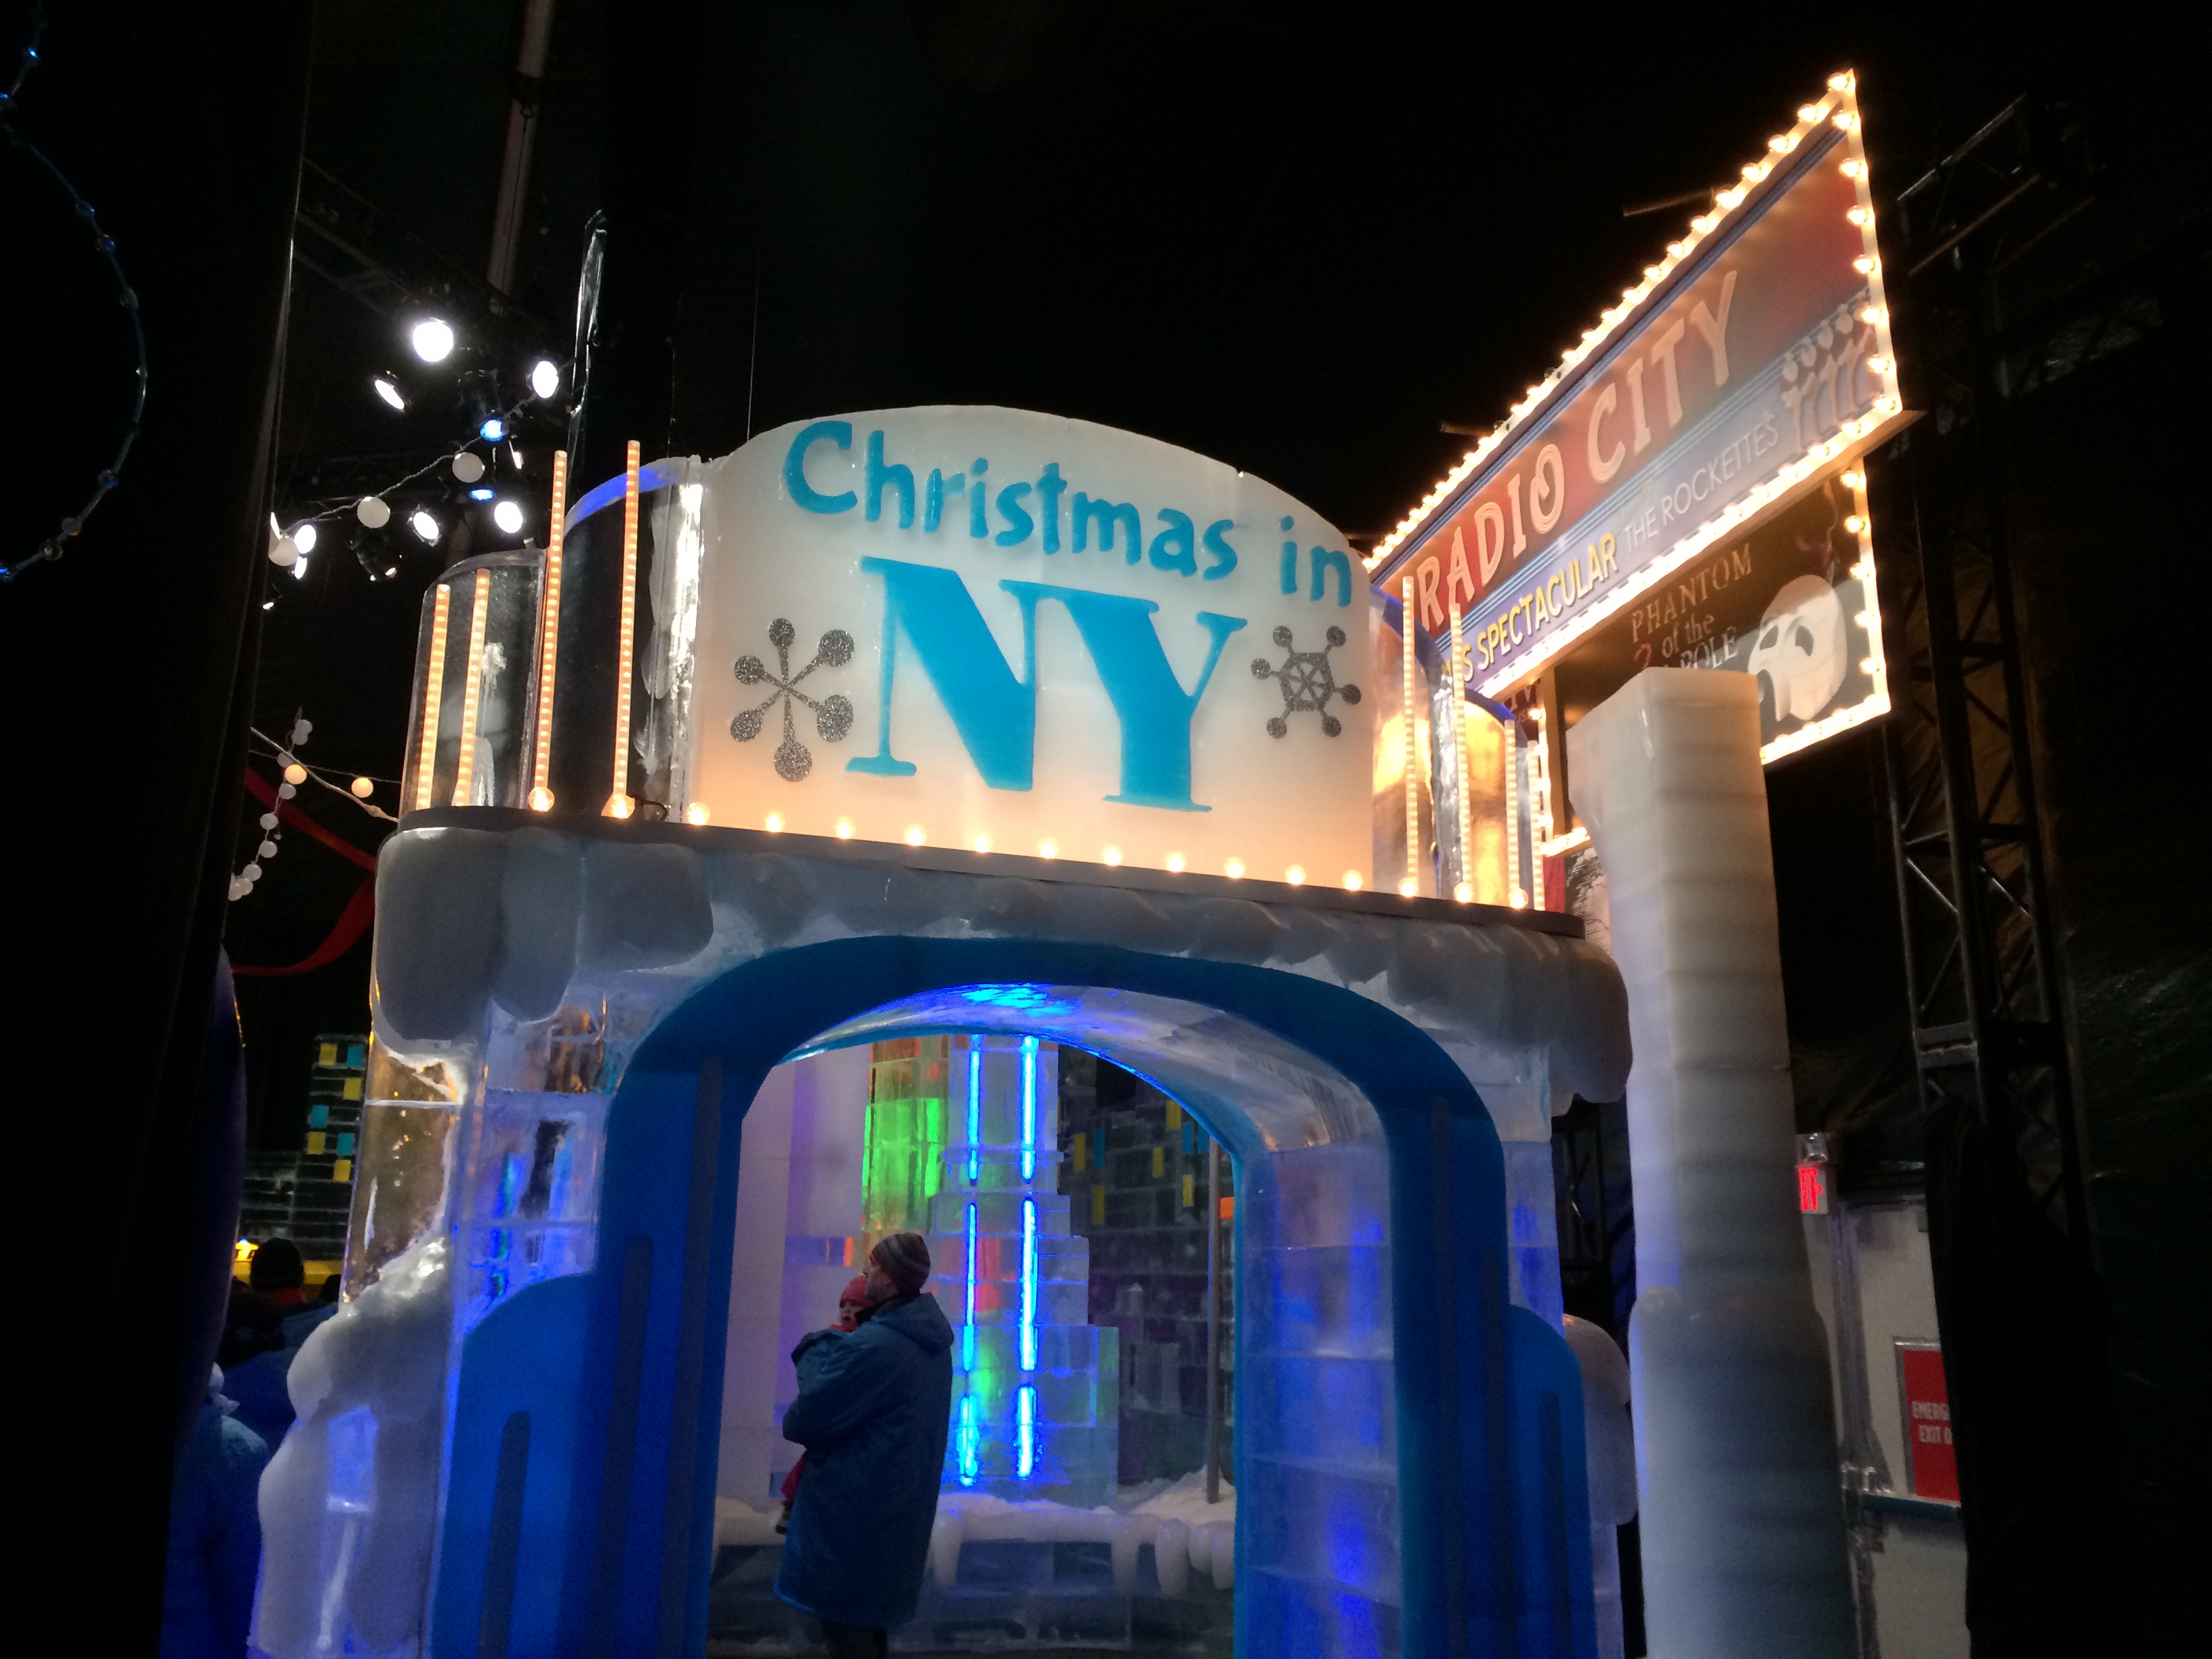 ICE! At The Gaylord National Convention Center.  Worth Taking Your Family?